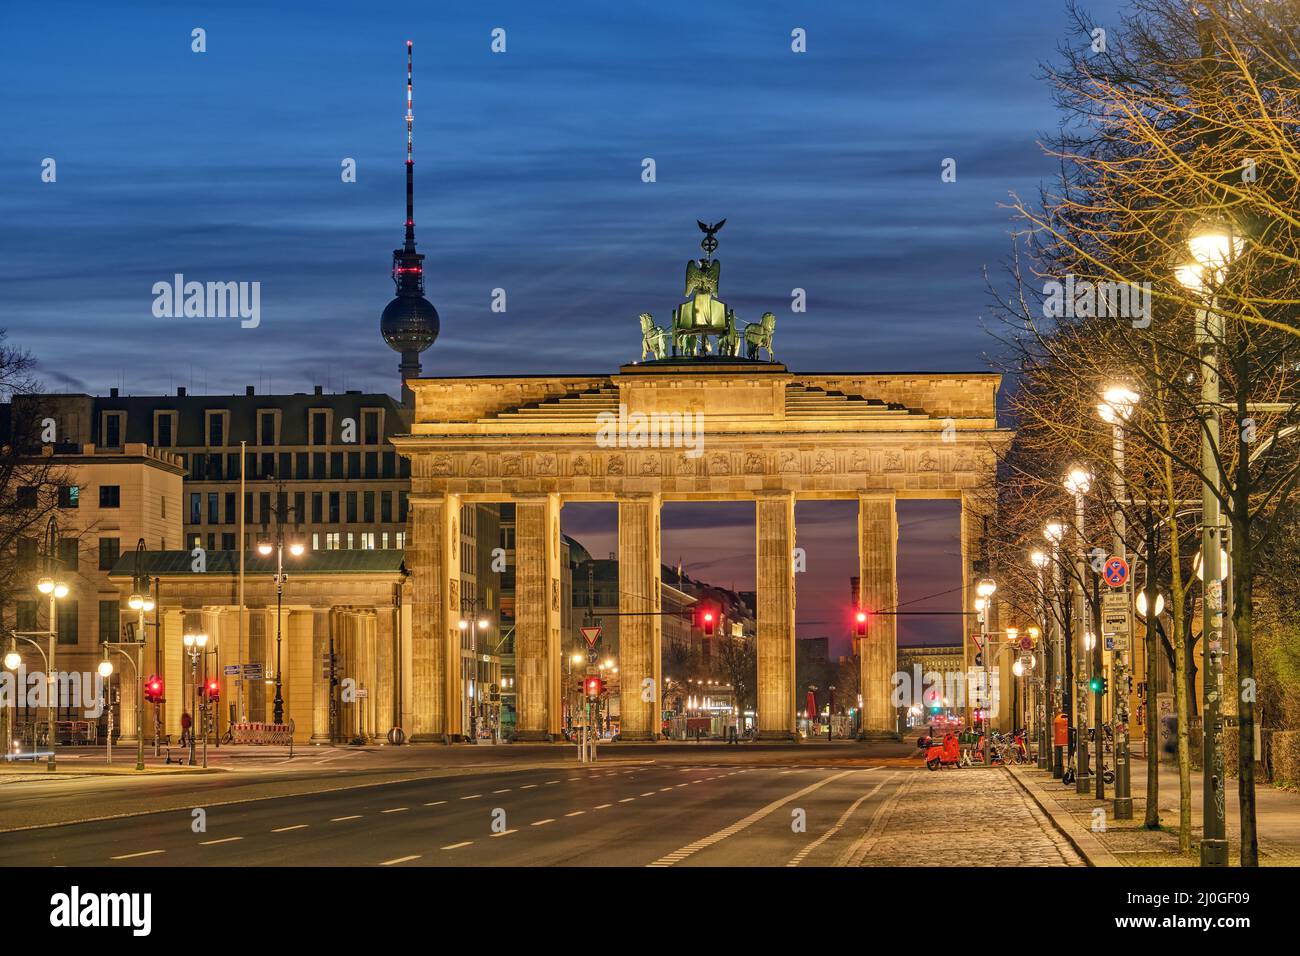 The famous Brandenburg Gate in Berlin with the Television Tower at dawn Stock Photo